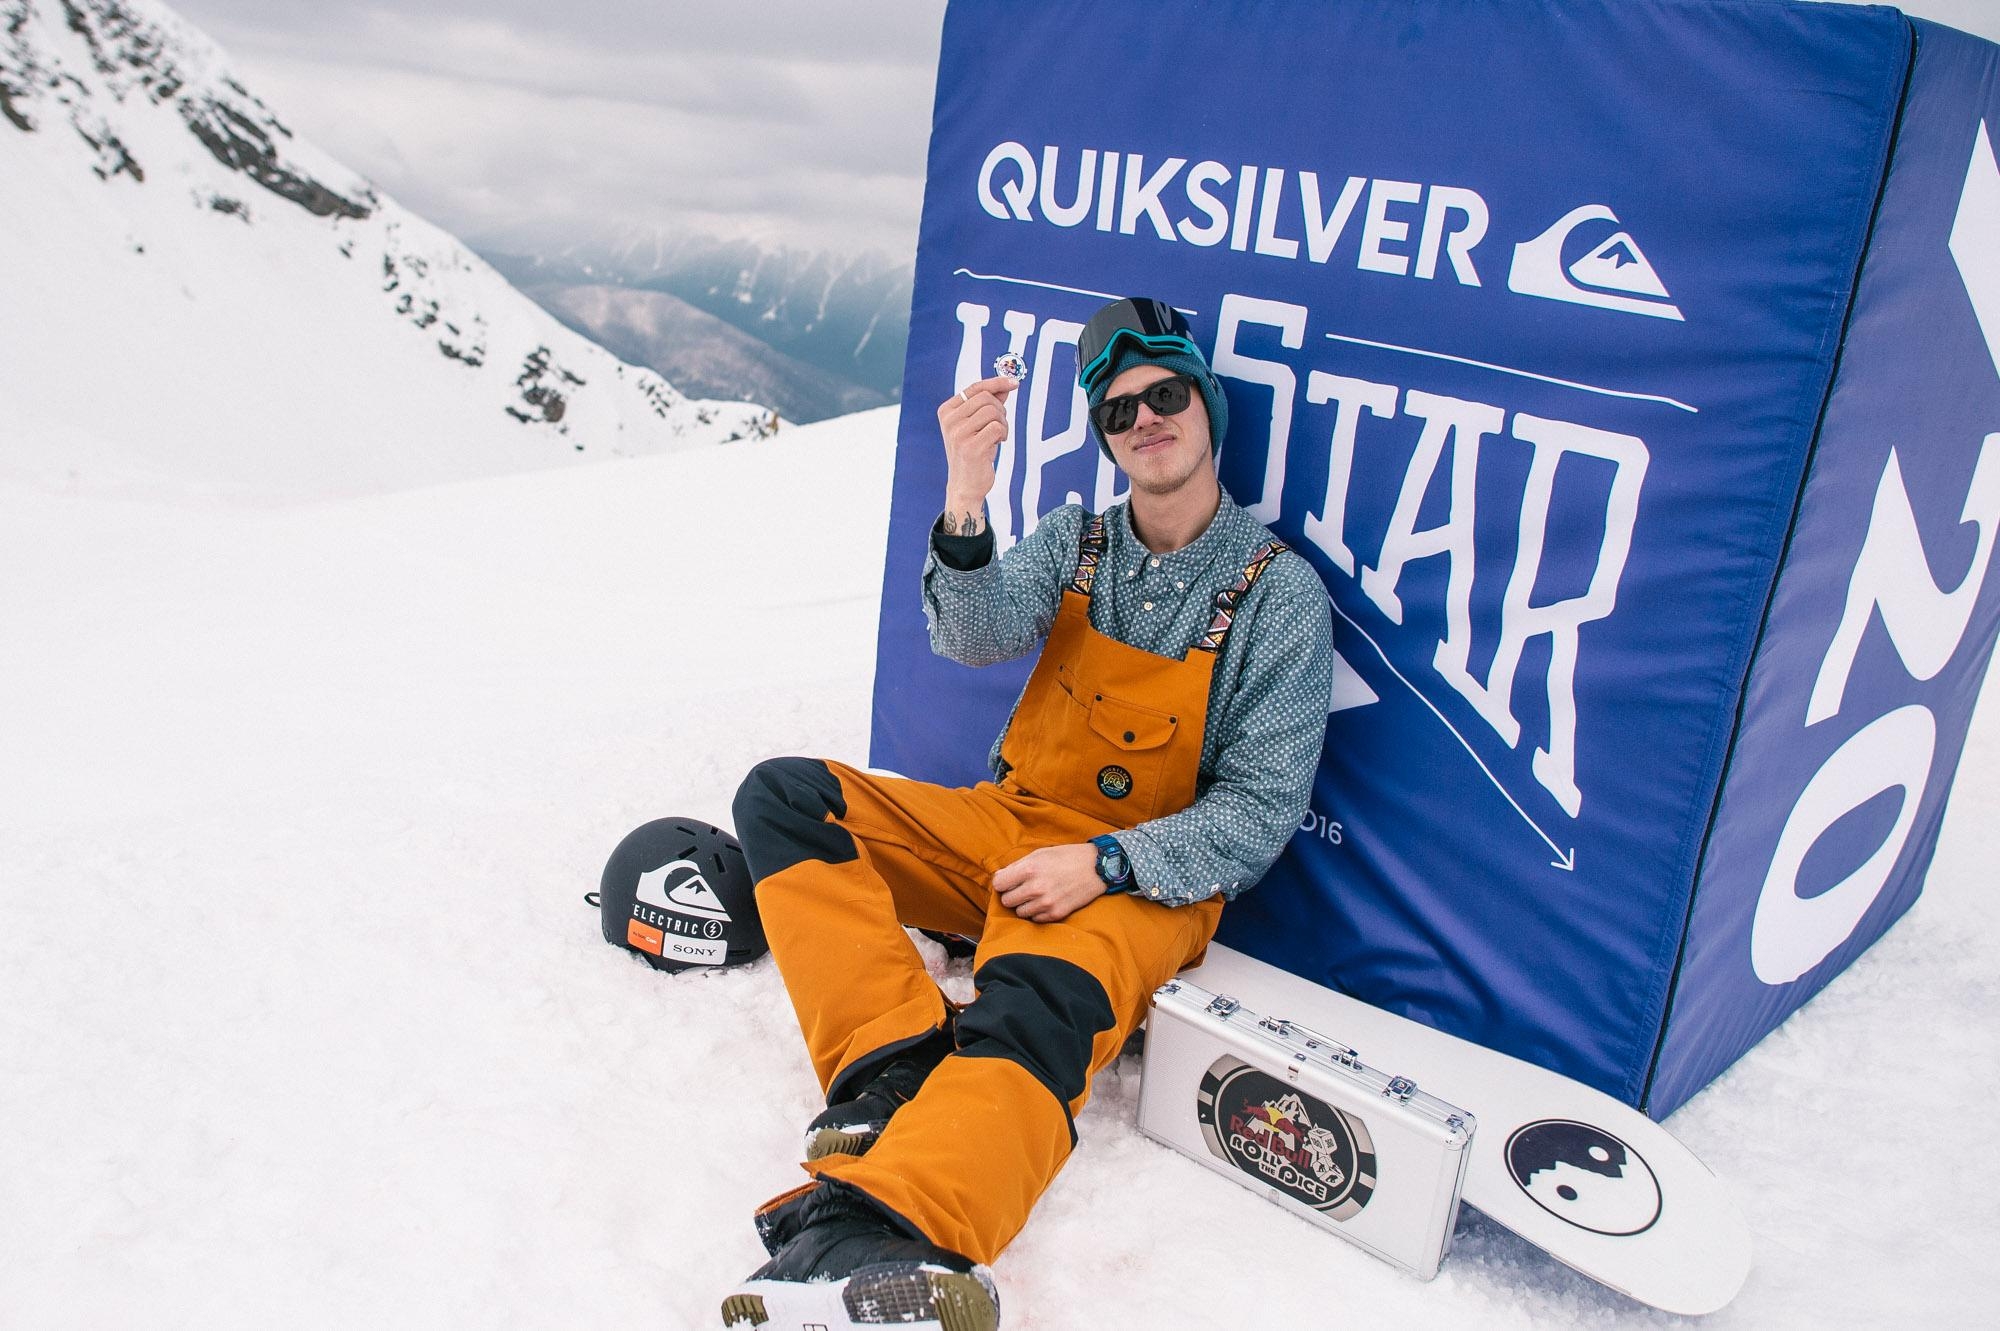 New star videos. Quiksilver New Star Camp. Quiksilver New Star Camp Сочи. New Star Camp 2019. Quicksilver Camp Сочи.